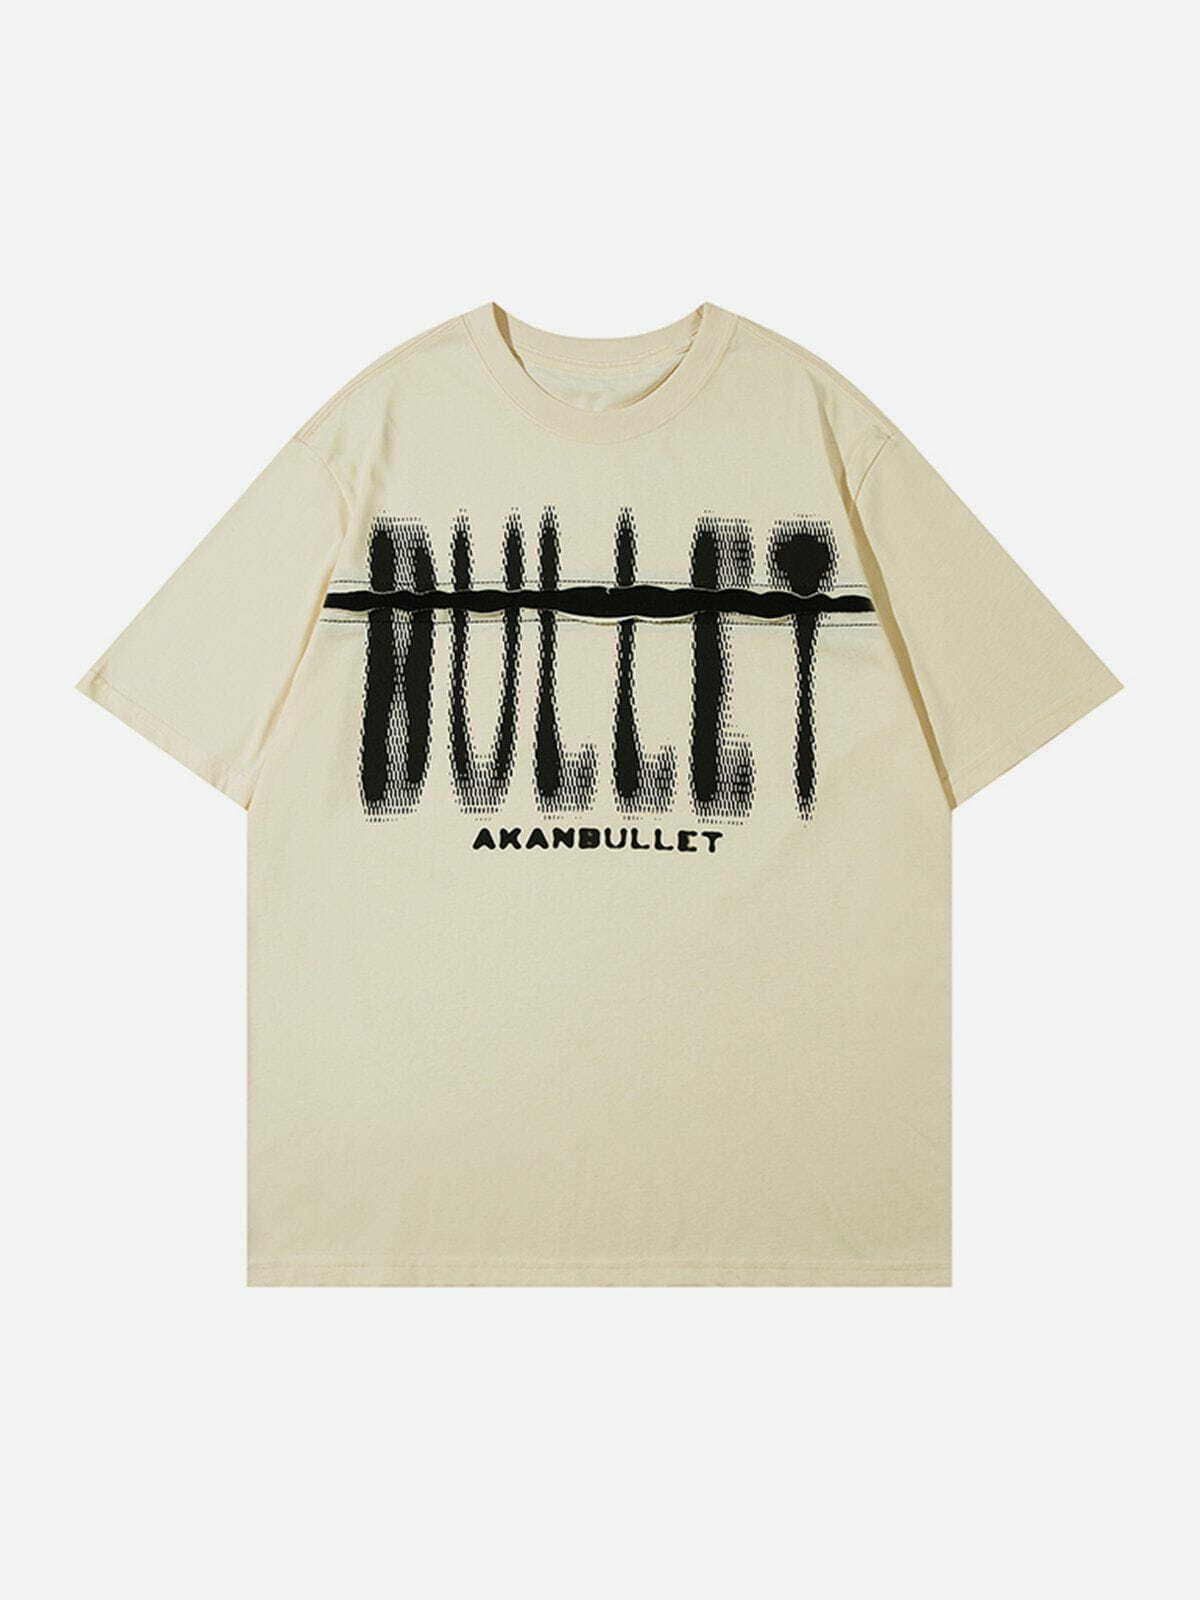 cut bullet graphic tee edgy streetwear statement 4787